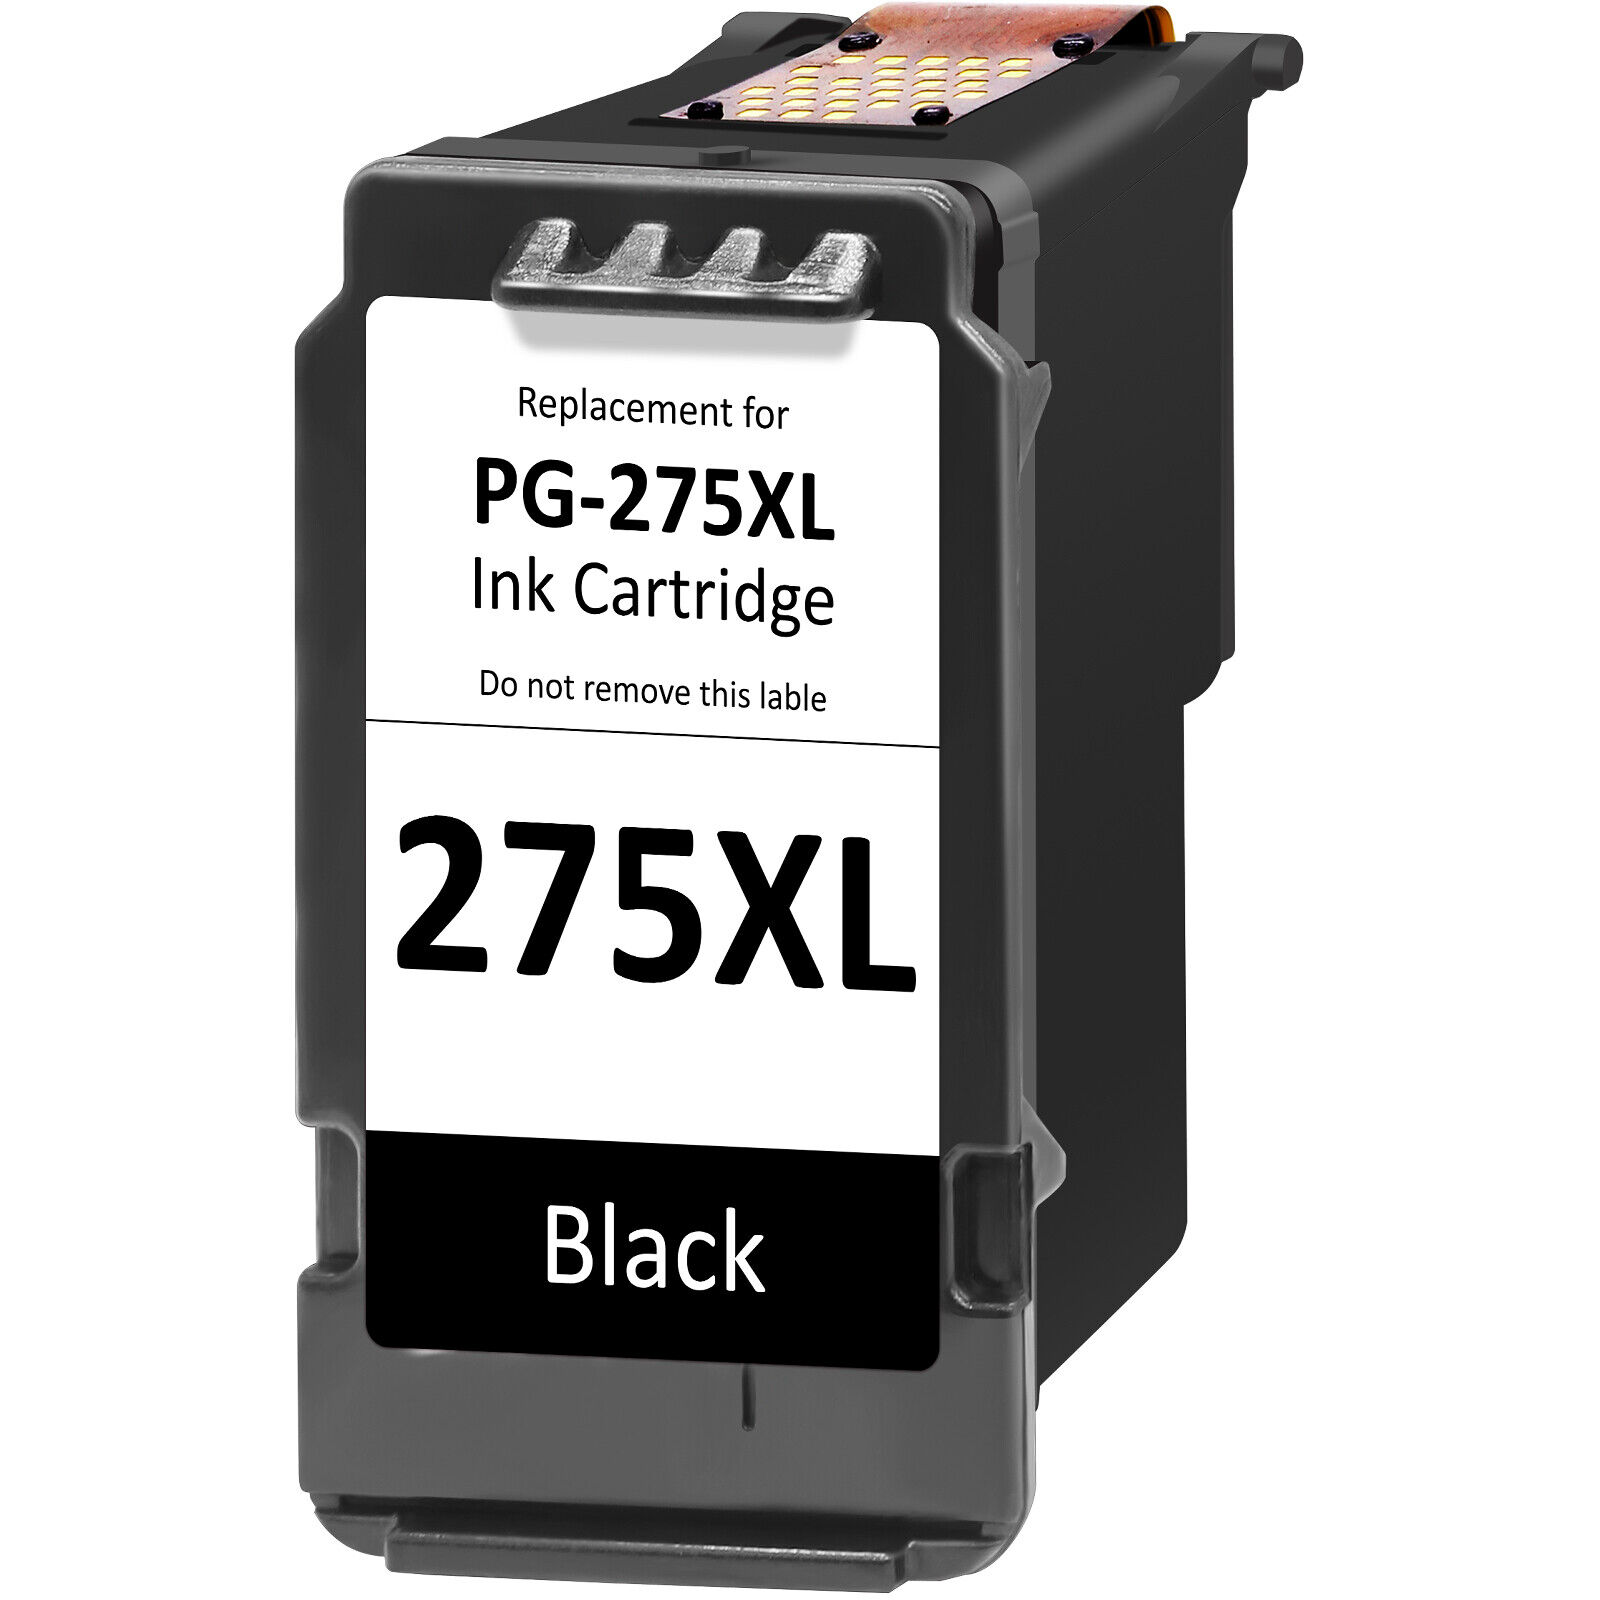 PG-275XL CL-276XL Ink Cartridge for Canon PIXMA TS3520 TS3522 TR4720 TR4722 lot